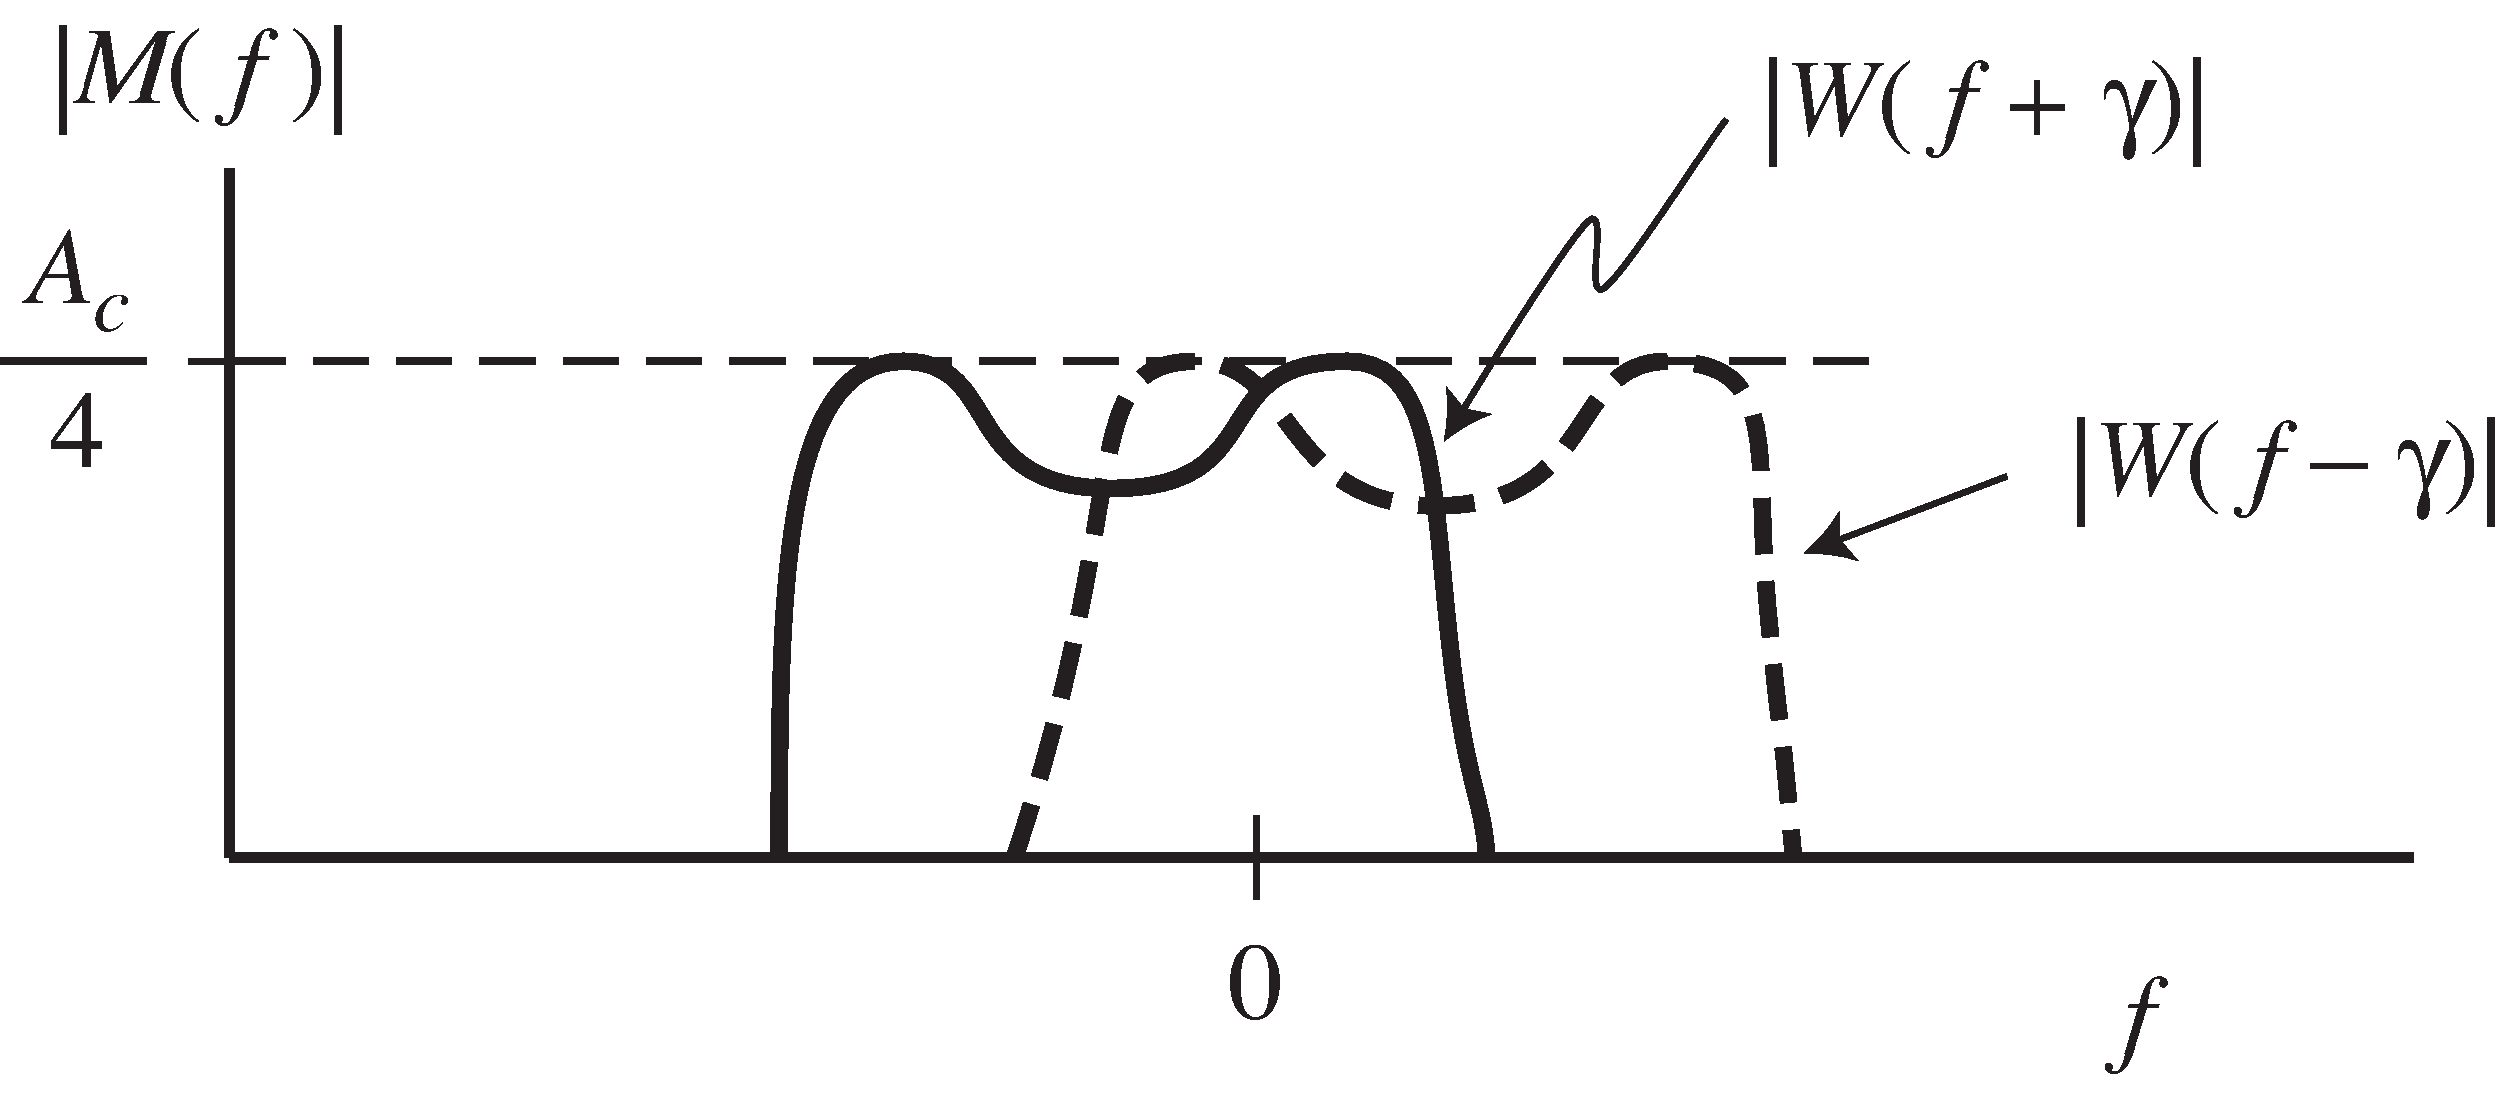 When there is a carrier frequency offset in the receiver oscillator, the two images of W(·) do not align properly. Their sum is not equal to Ac/2W(f).